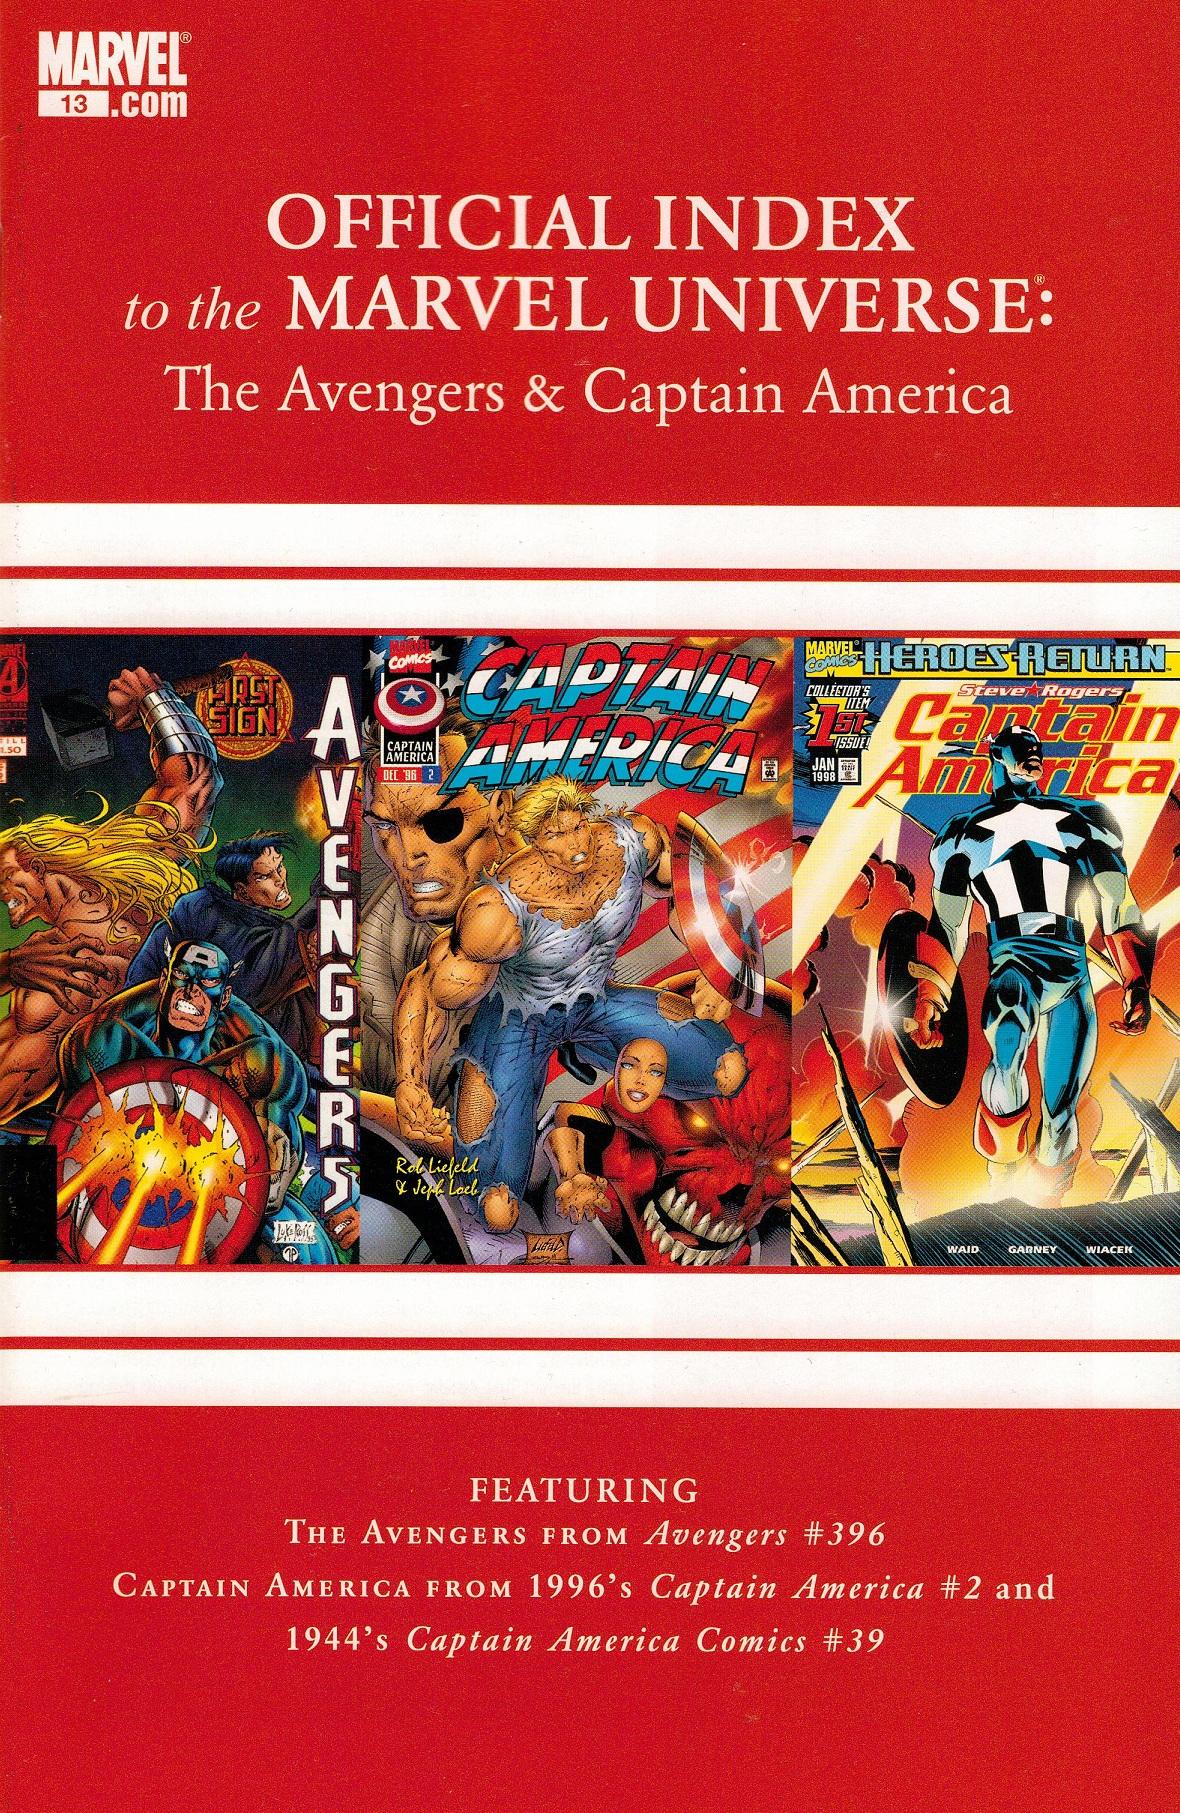 Avengers, Thor & Captain America: Official Index to the Marvel Universe Vol. 1 #13